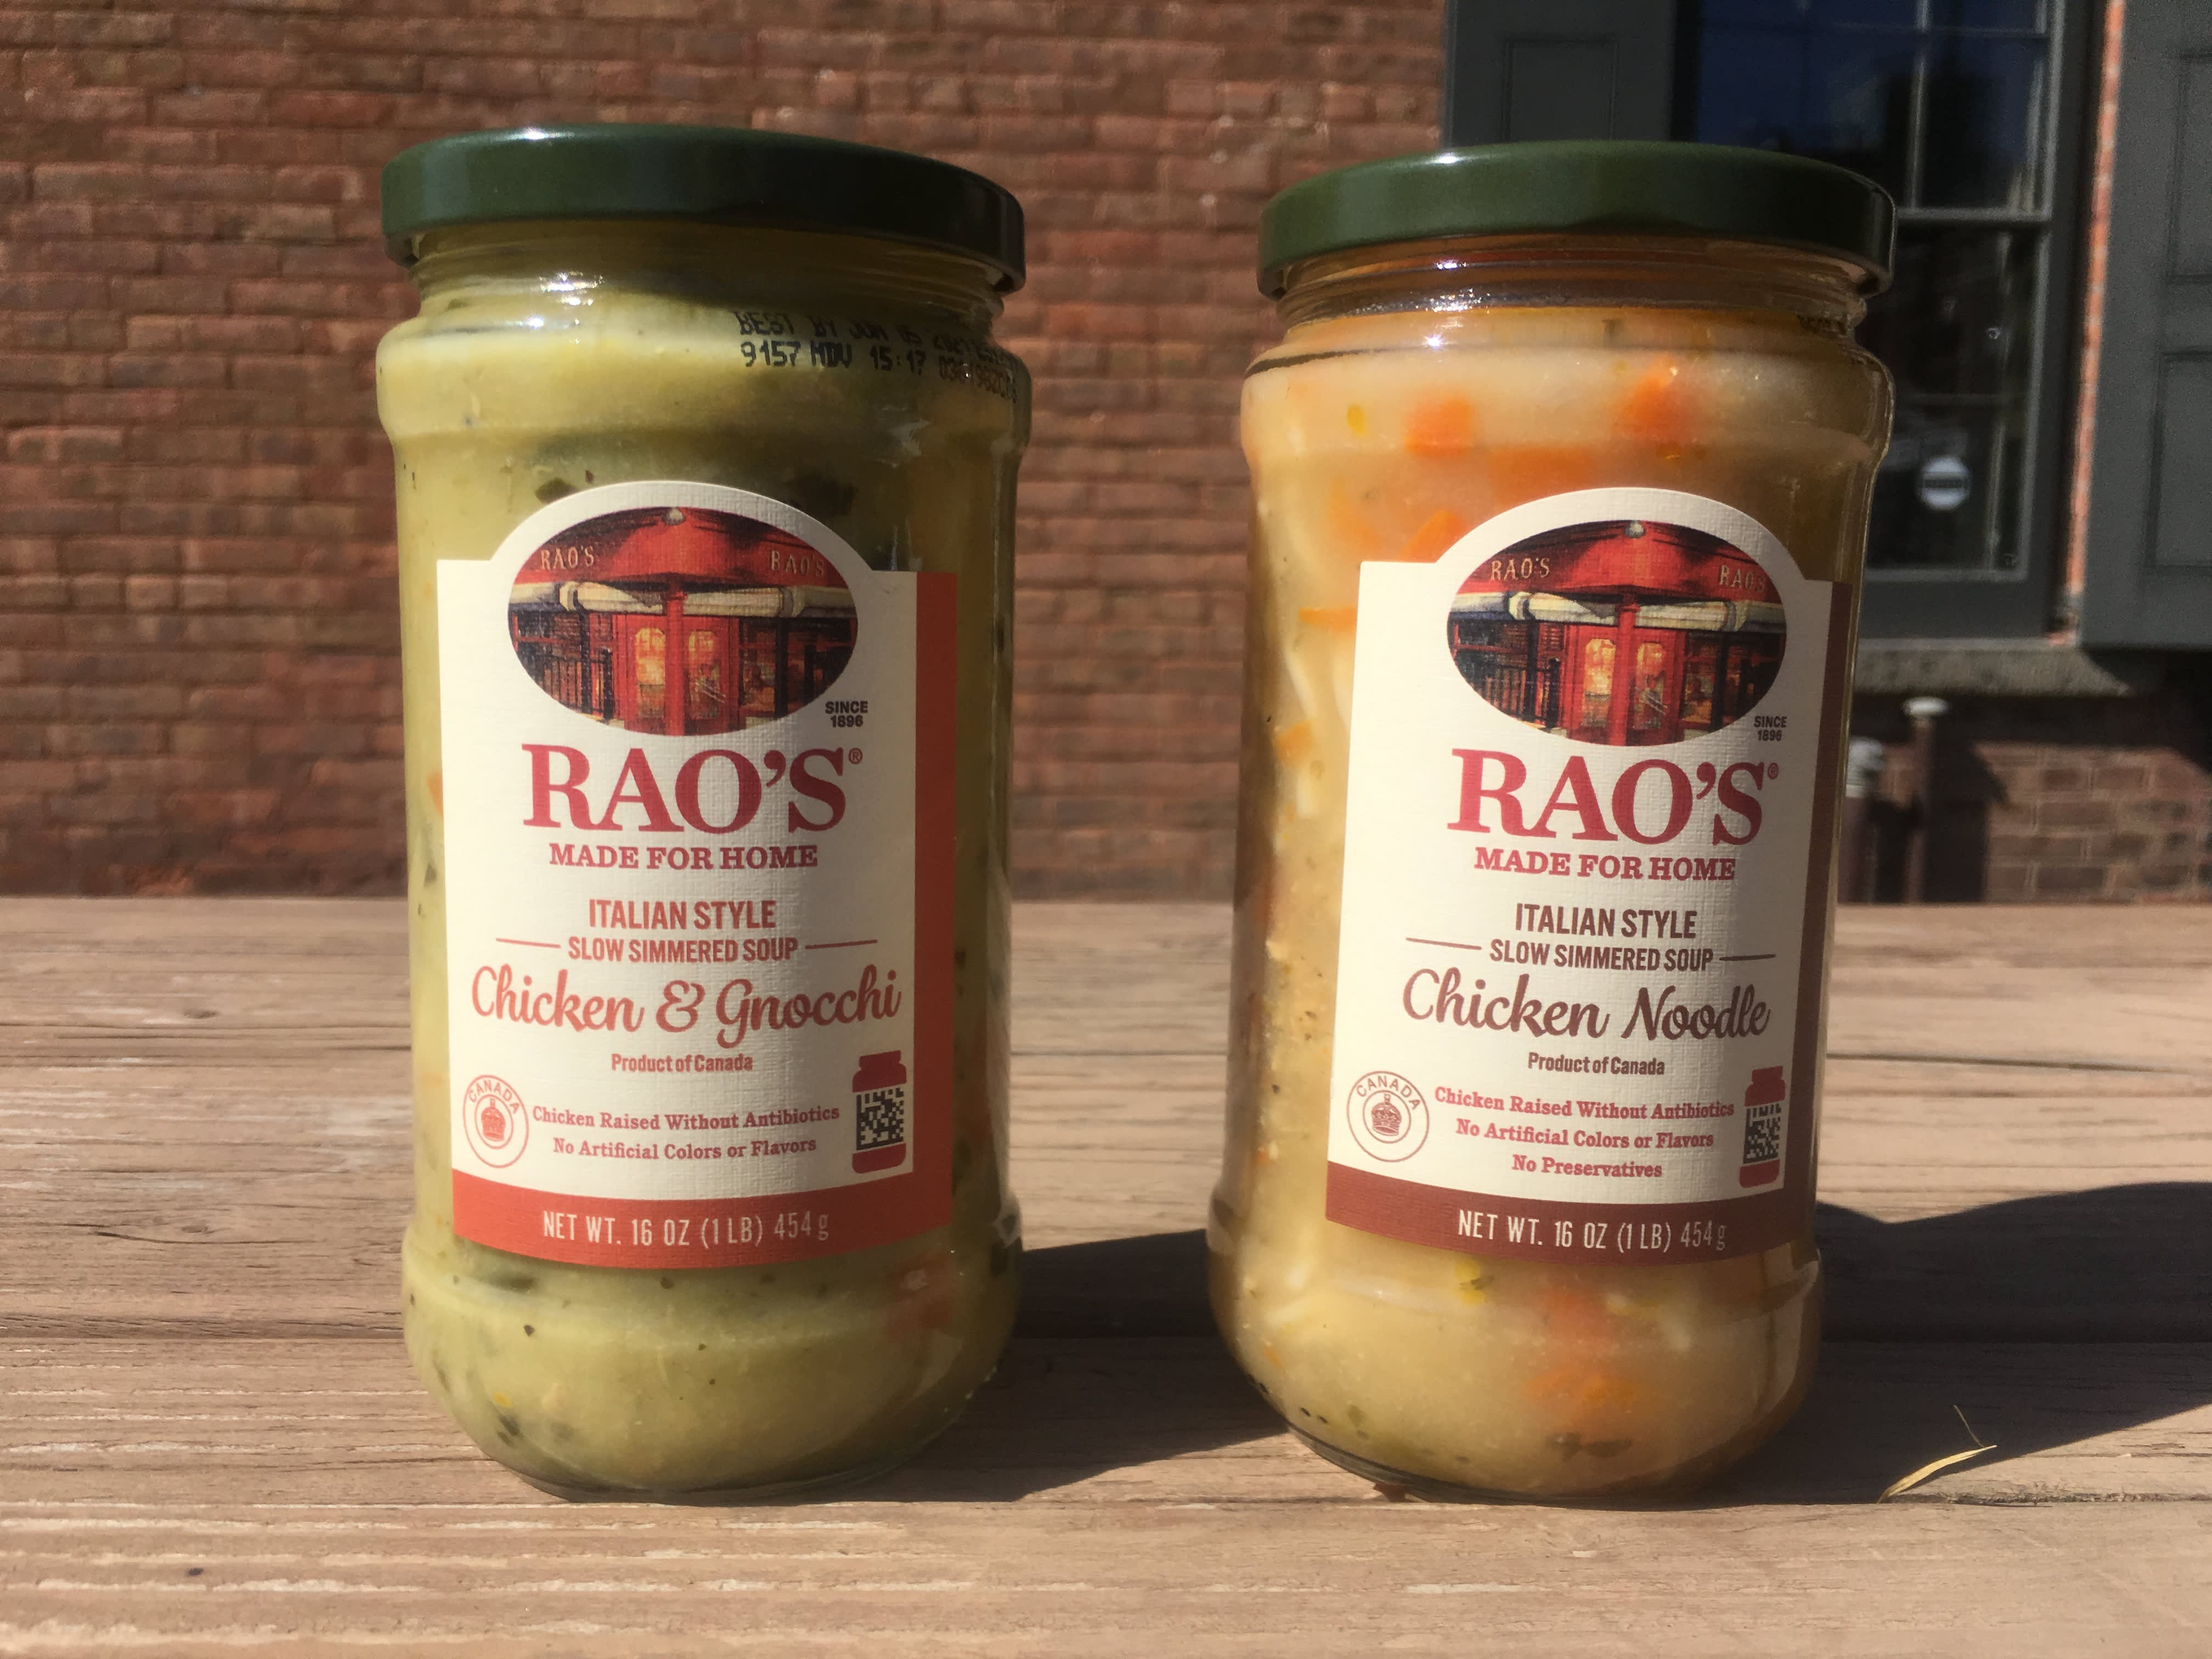  Rao's Homemade Soups Variety Pack of 6 Flavors- Raos Tomato  Basil Soup, Raos Italian Wedding Soup, Raos Chicken Noodle Soup, Raos Pasta  Fagioli Soup, Vegetable Minestrone, and Chicken & Gnocchi